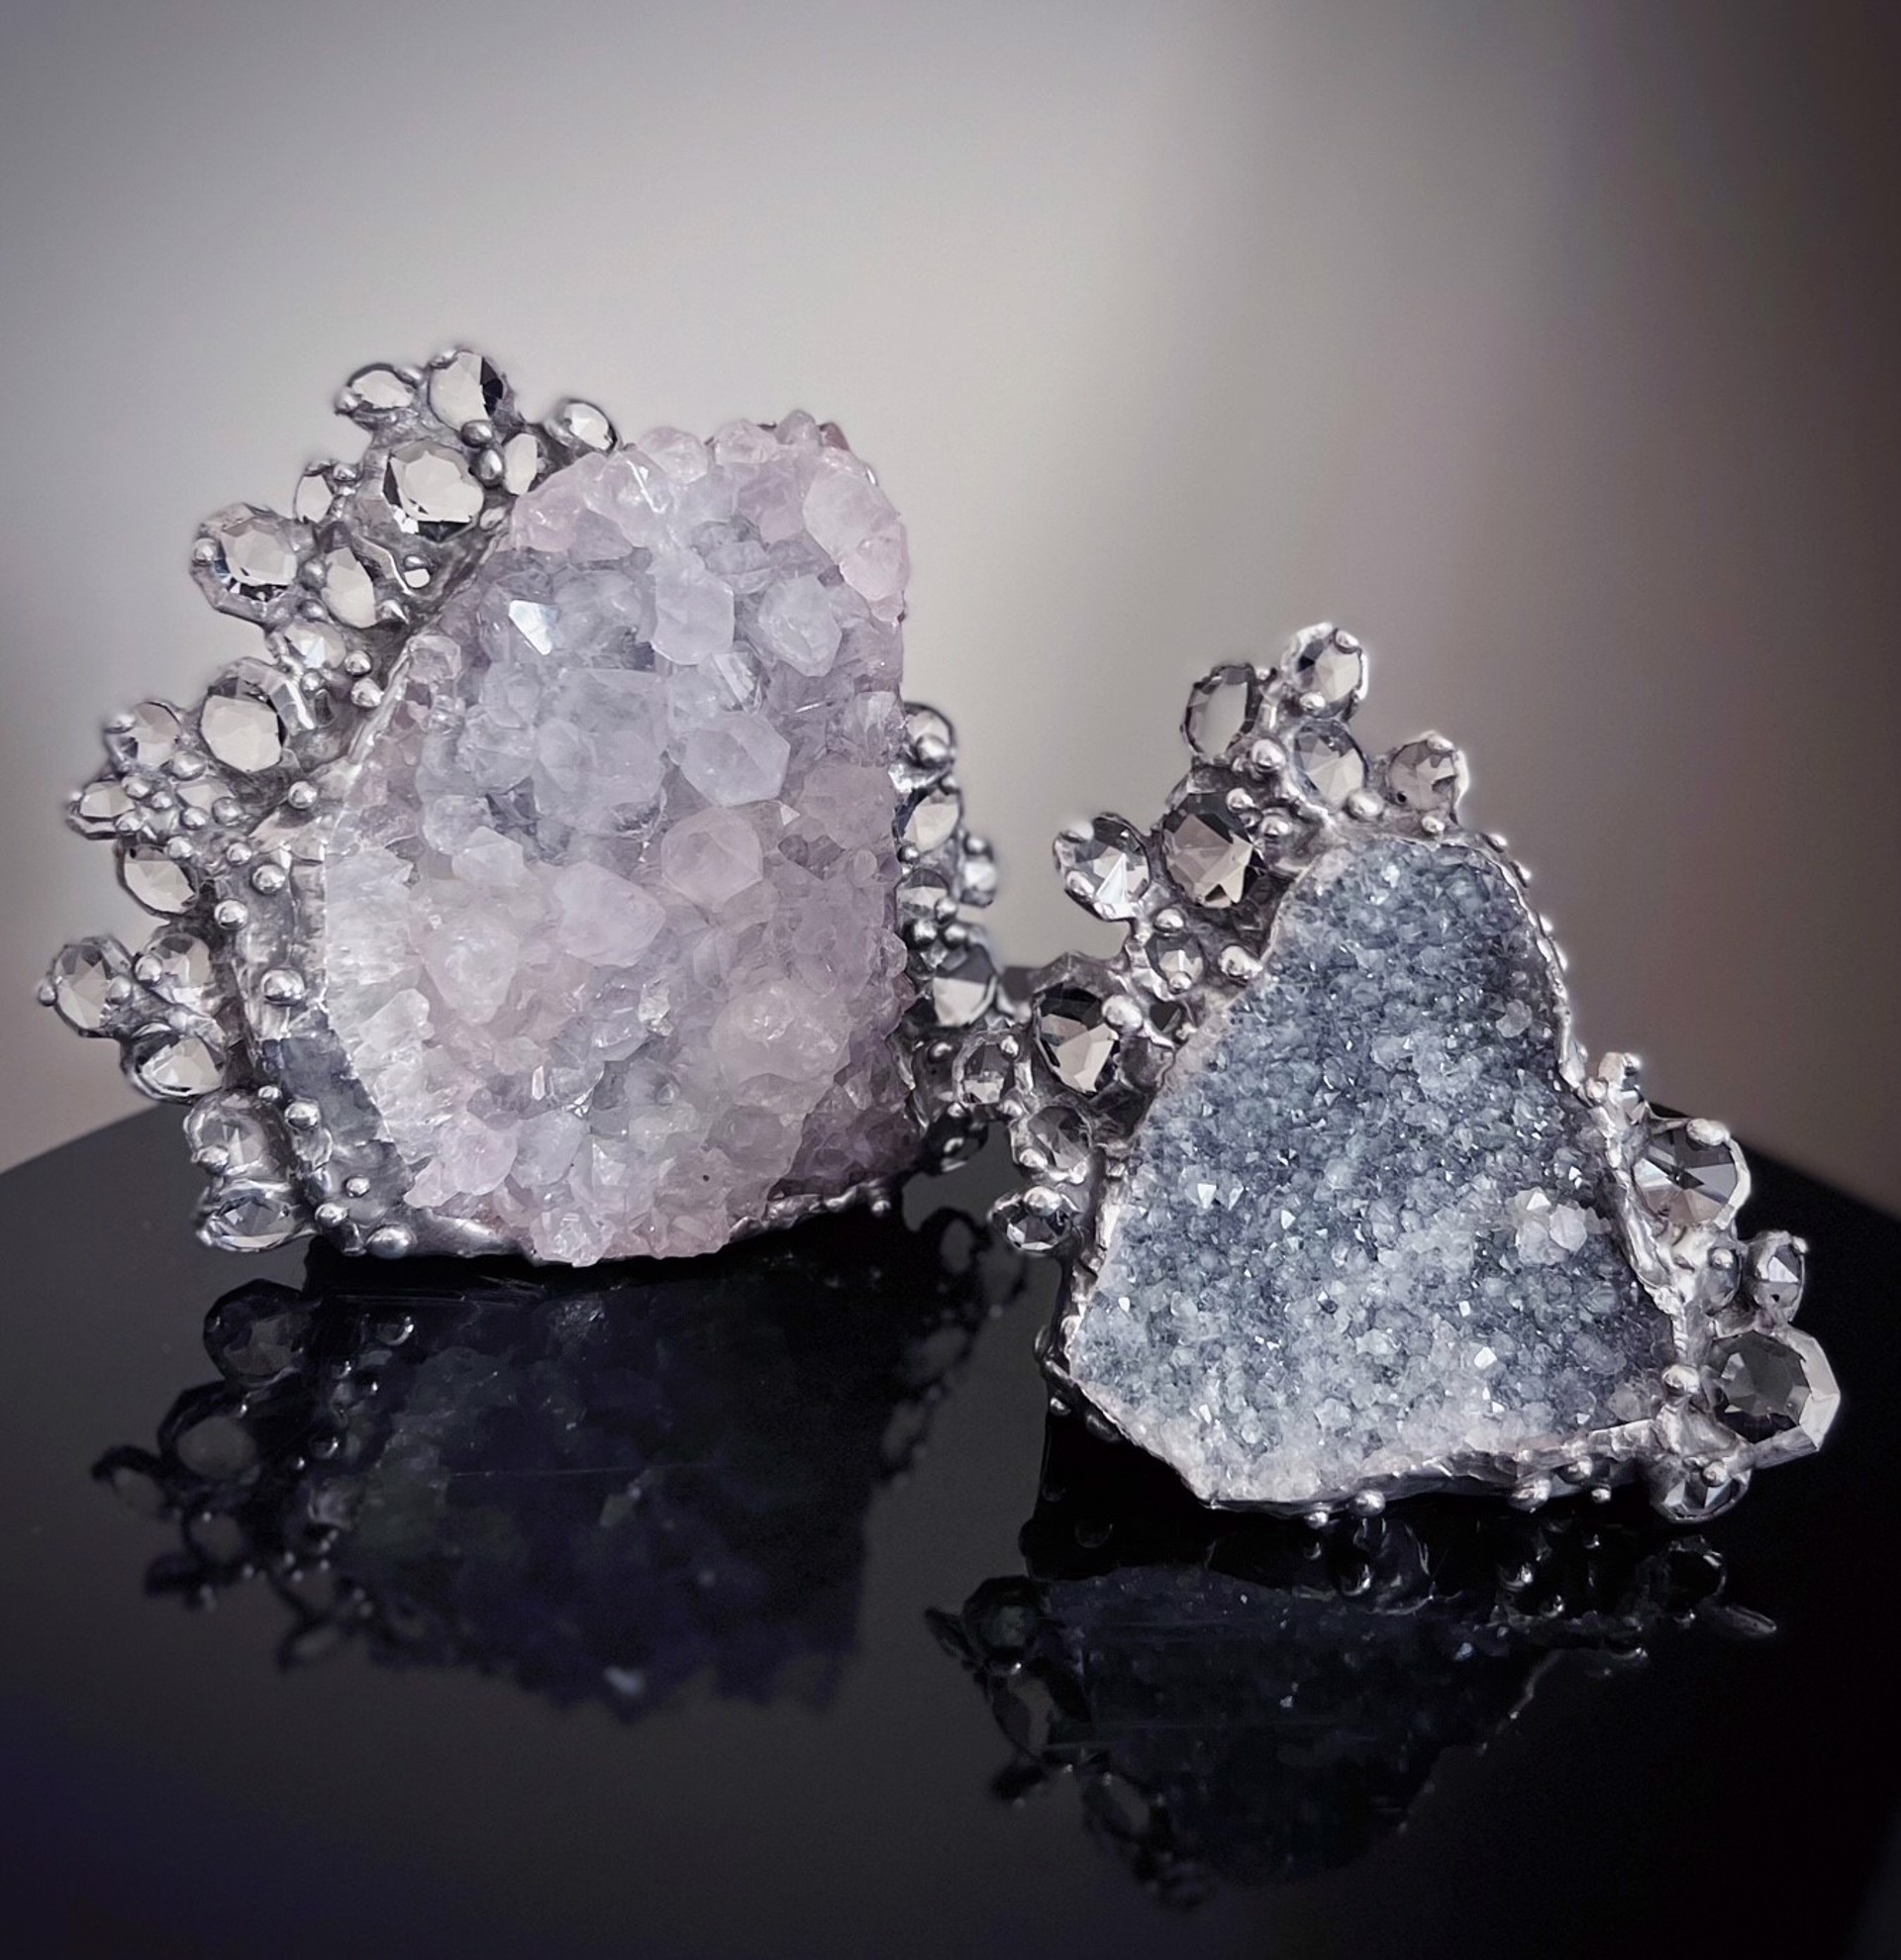 Geodes with Silver Solder and Antique Chandelier Crystals by Trinka 5 Designs